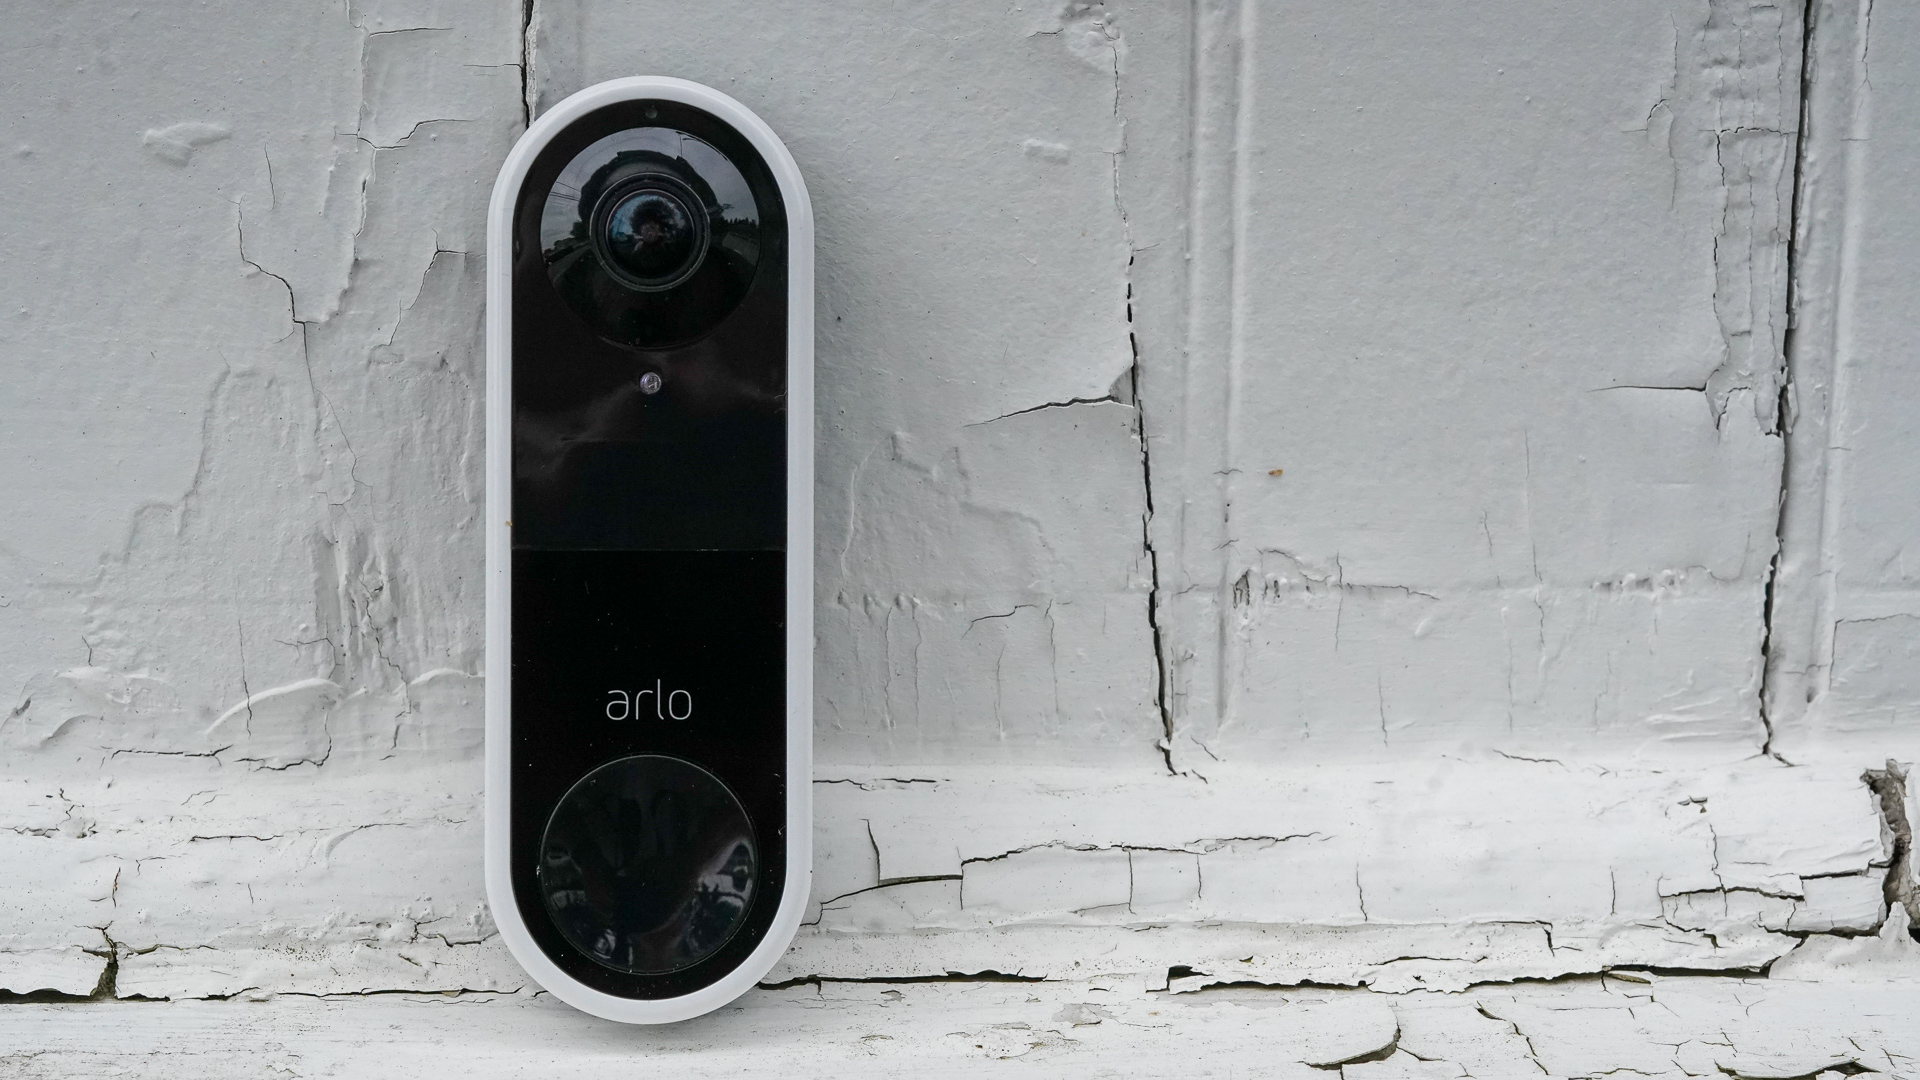 Does Arlo Doorbell Require a Subscription